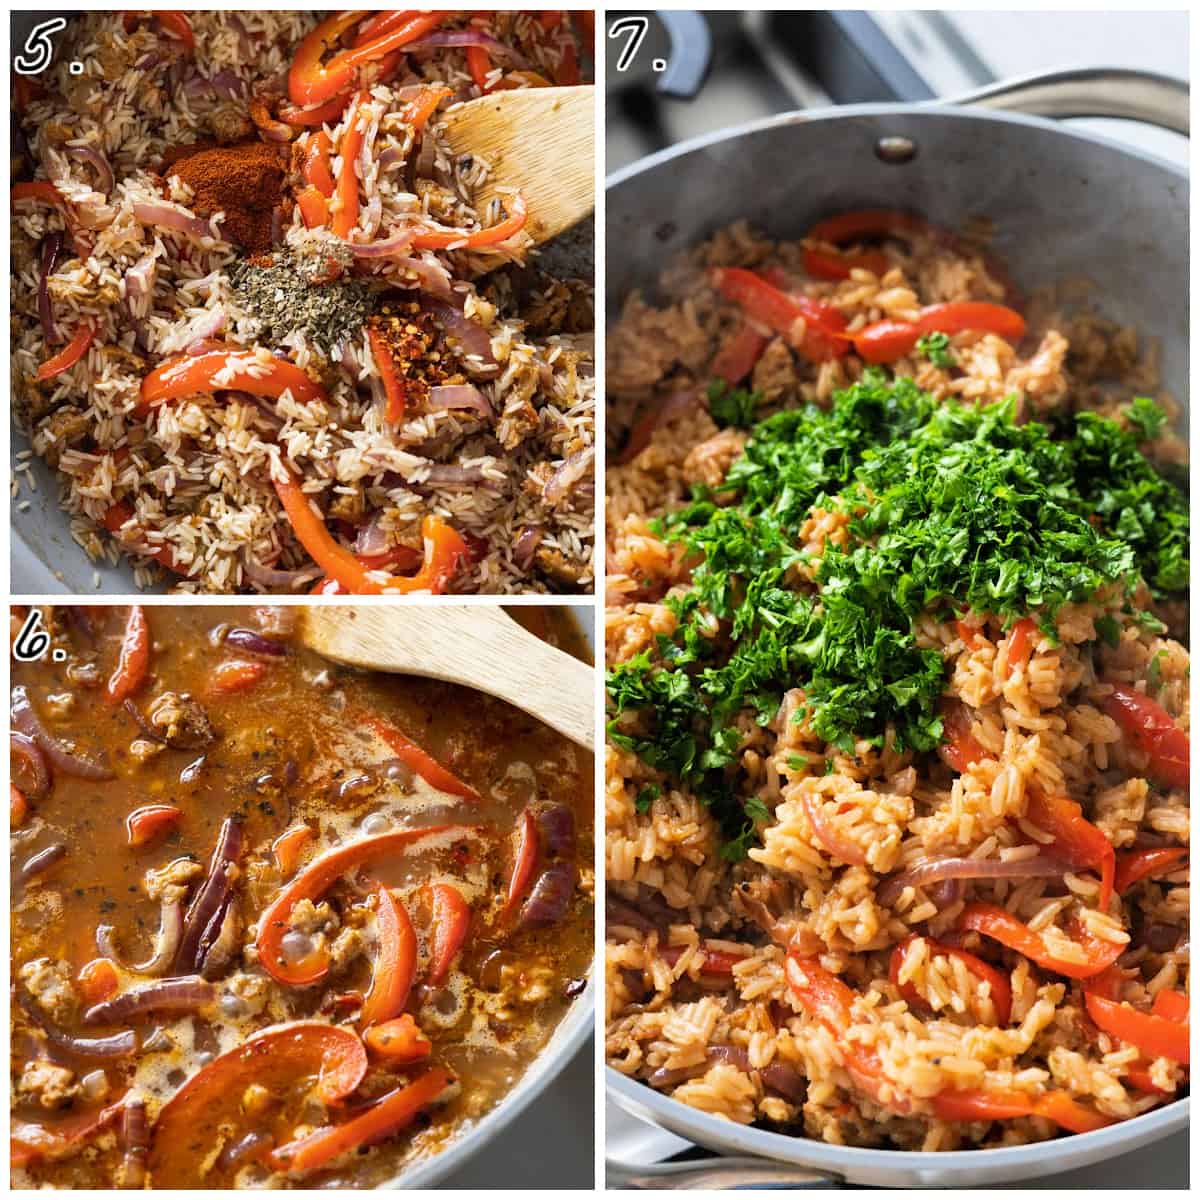 Three process photos displaying the seasonings and broth being added, then showing the fully cooked dish in a pan. 